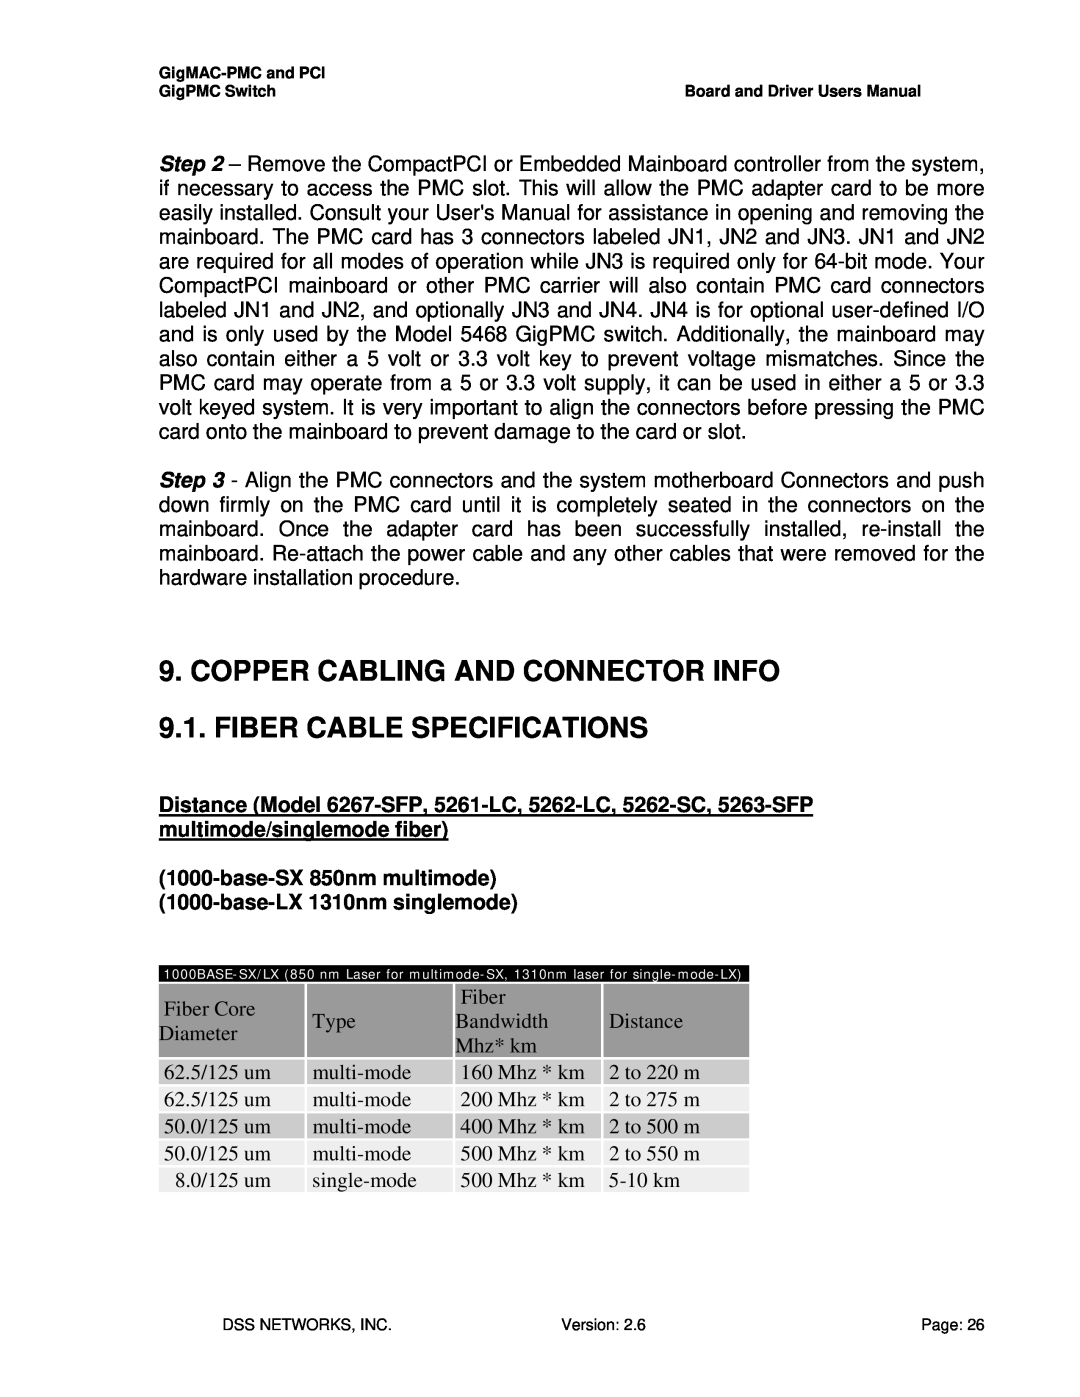 Intel PCI Copper Cabling And Connector Info, Fiber Cable Specifications, base-SX850nm multimode, base-LX1310nm singlemode 